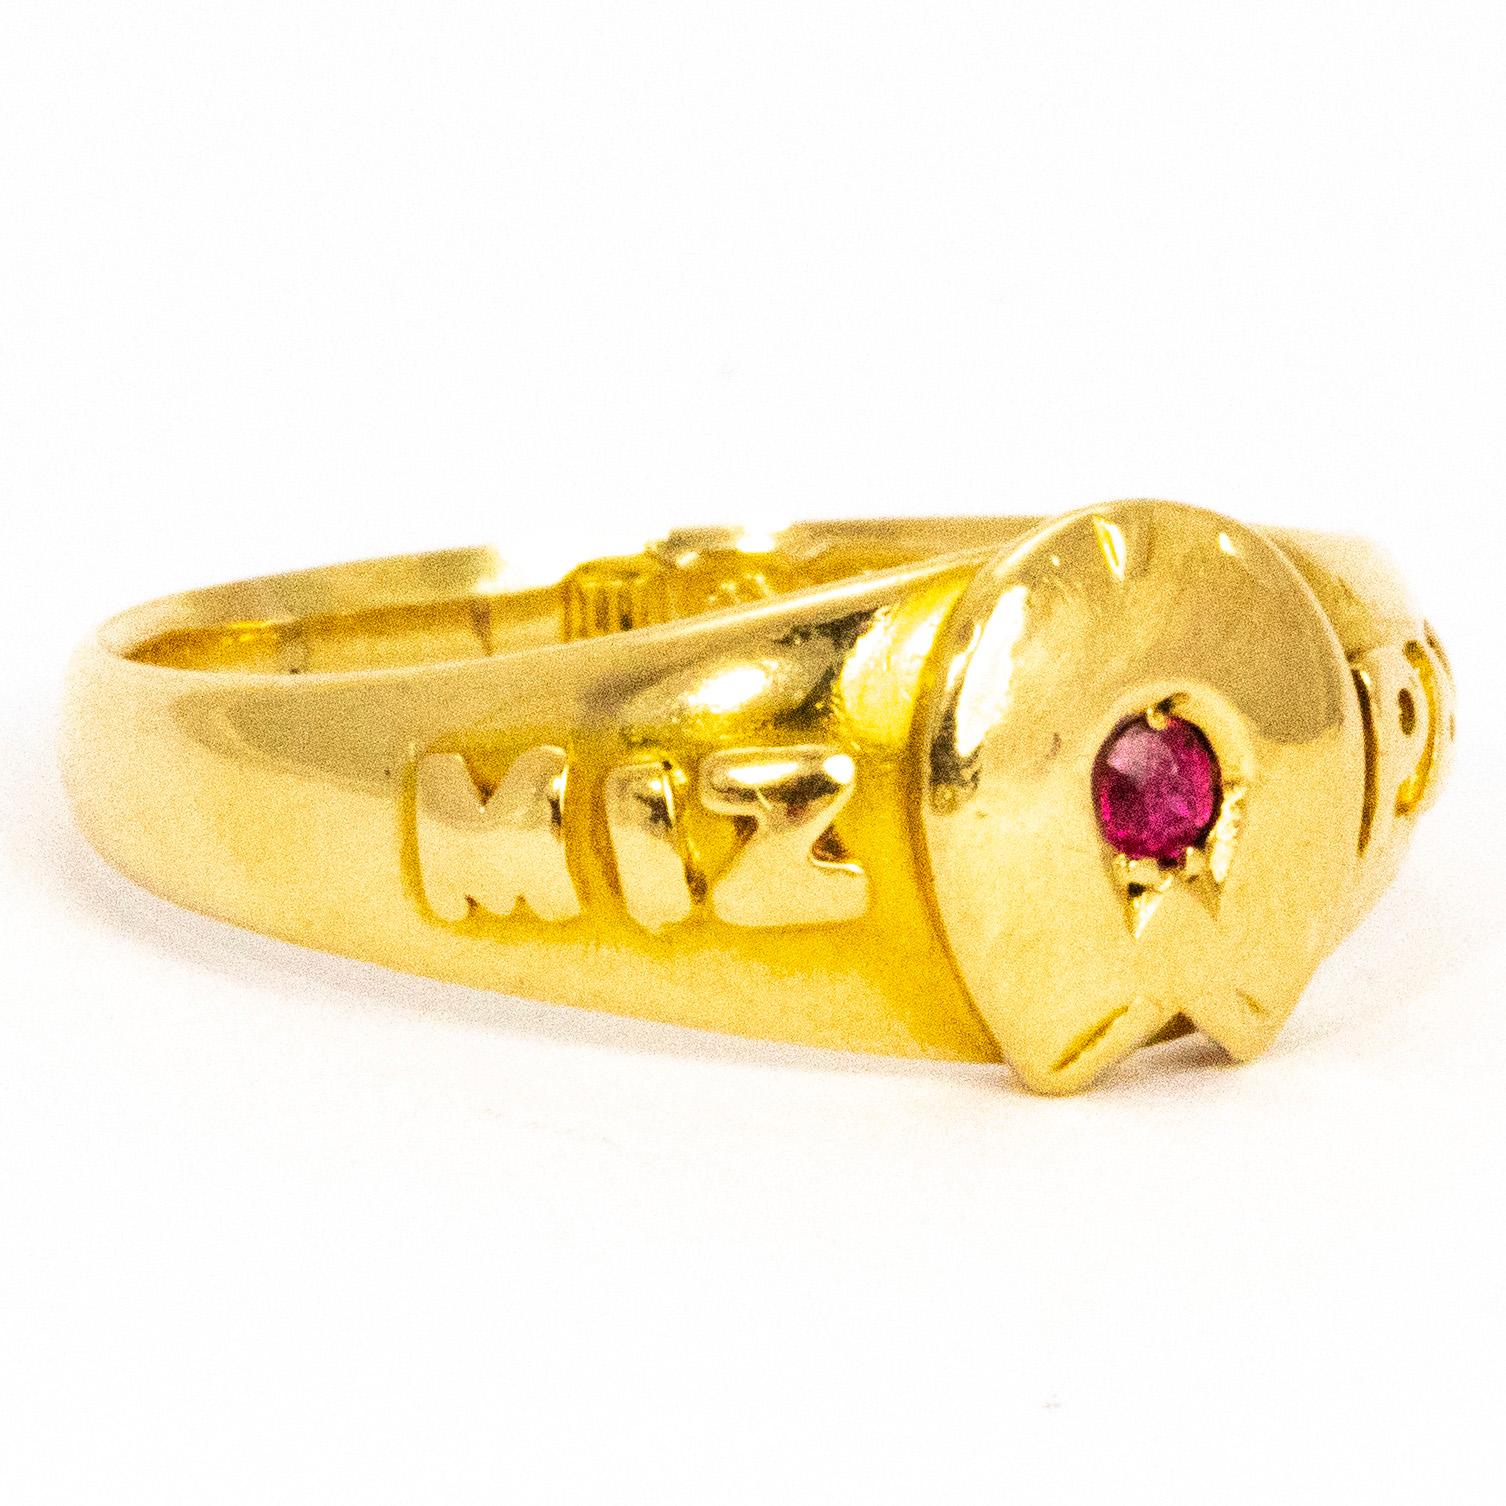 Mizpah is a Hebrew word that means 'watchtower' and is loosely interpreted as 'May God watch over you' and is still worn as a token of love or friendship. At the centre of the ring holds a ruby measuring 4pts and the chunky 18ct gold has a very